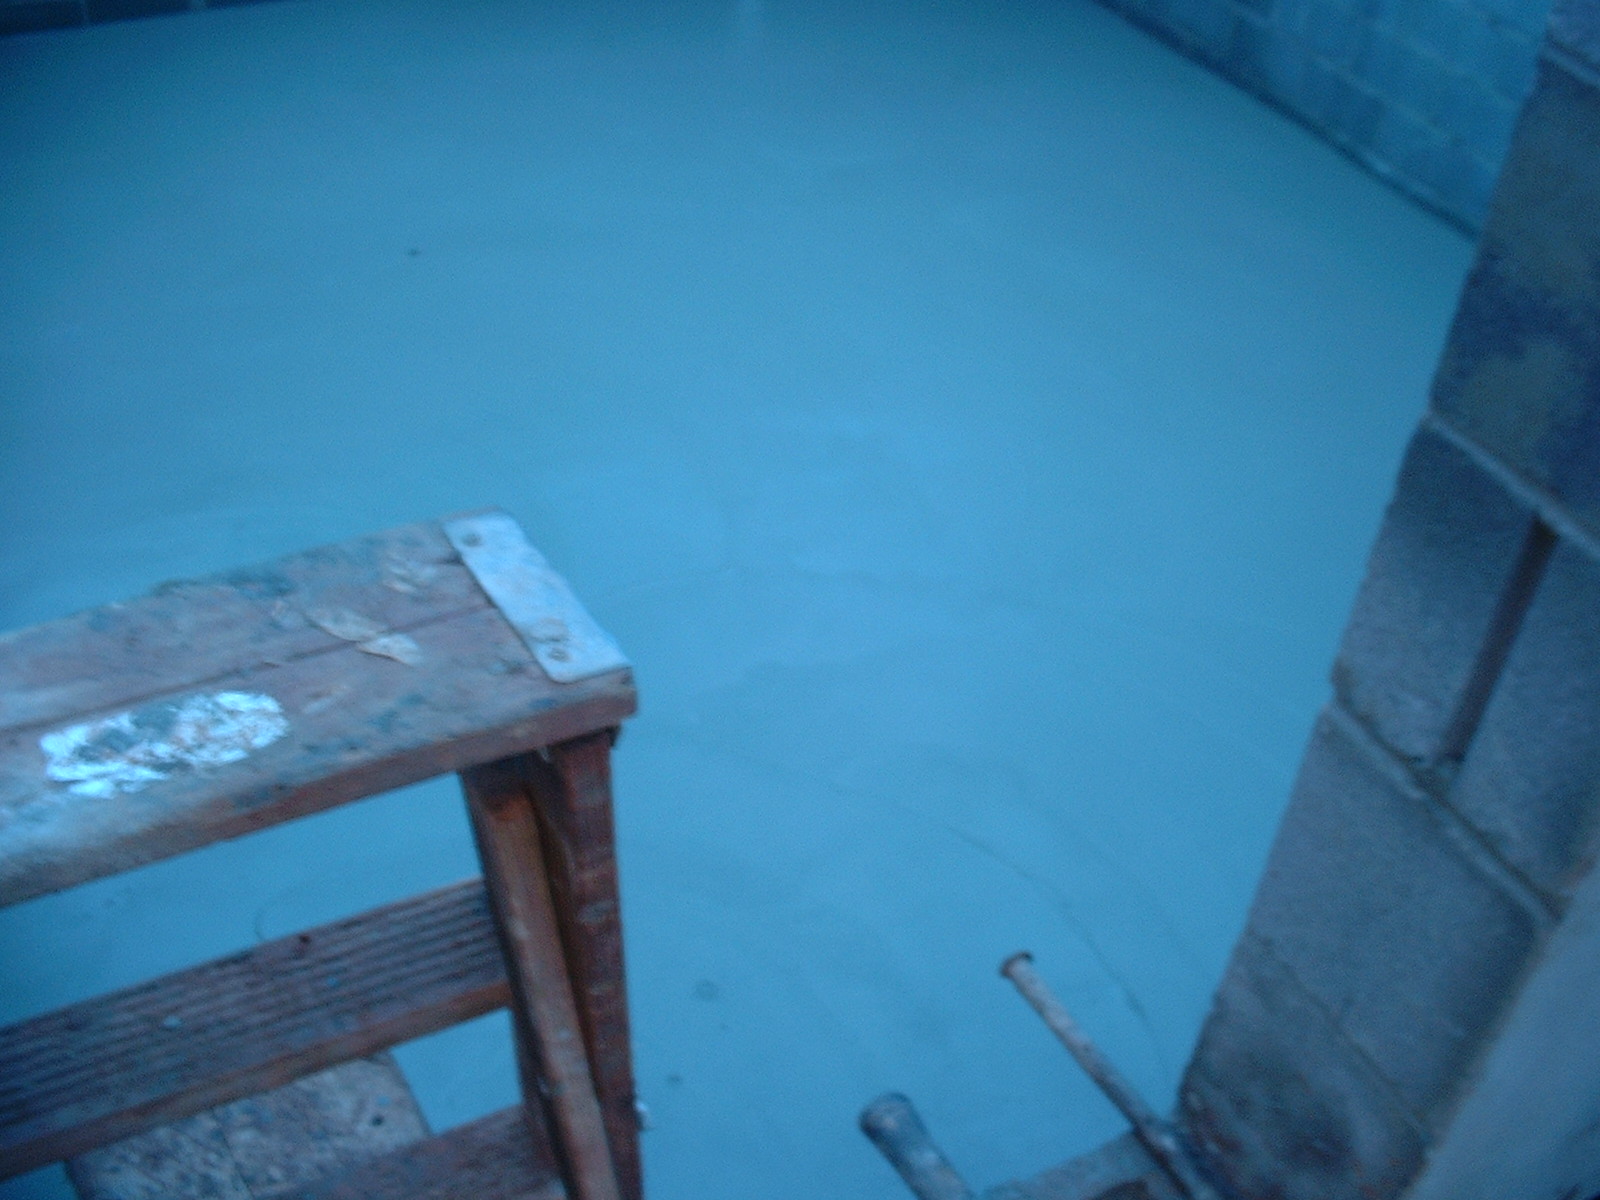 Another picture of the basement floor. The blue color is the tarp.